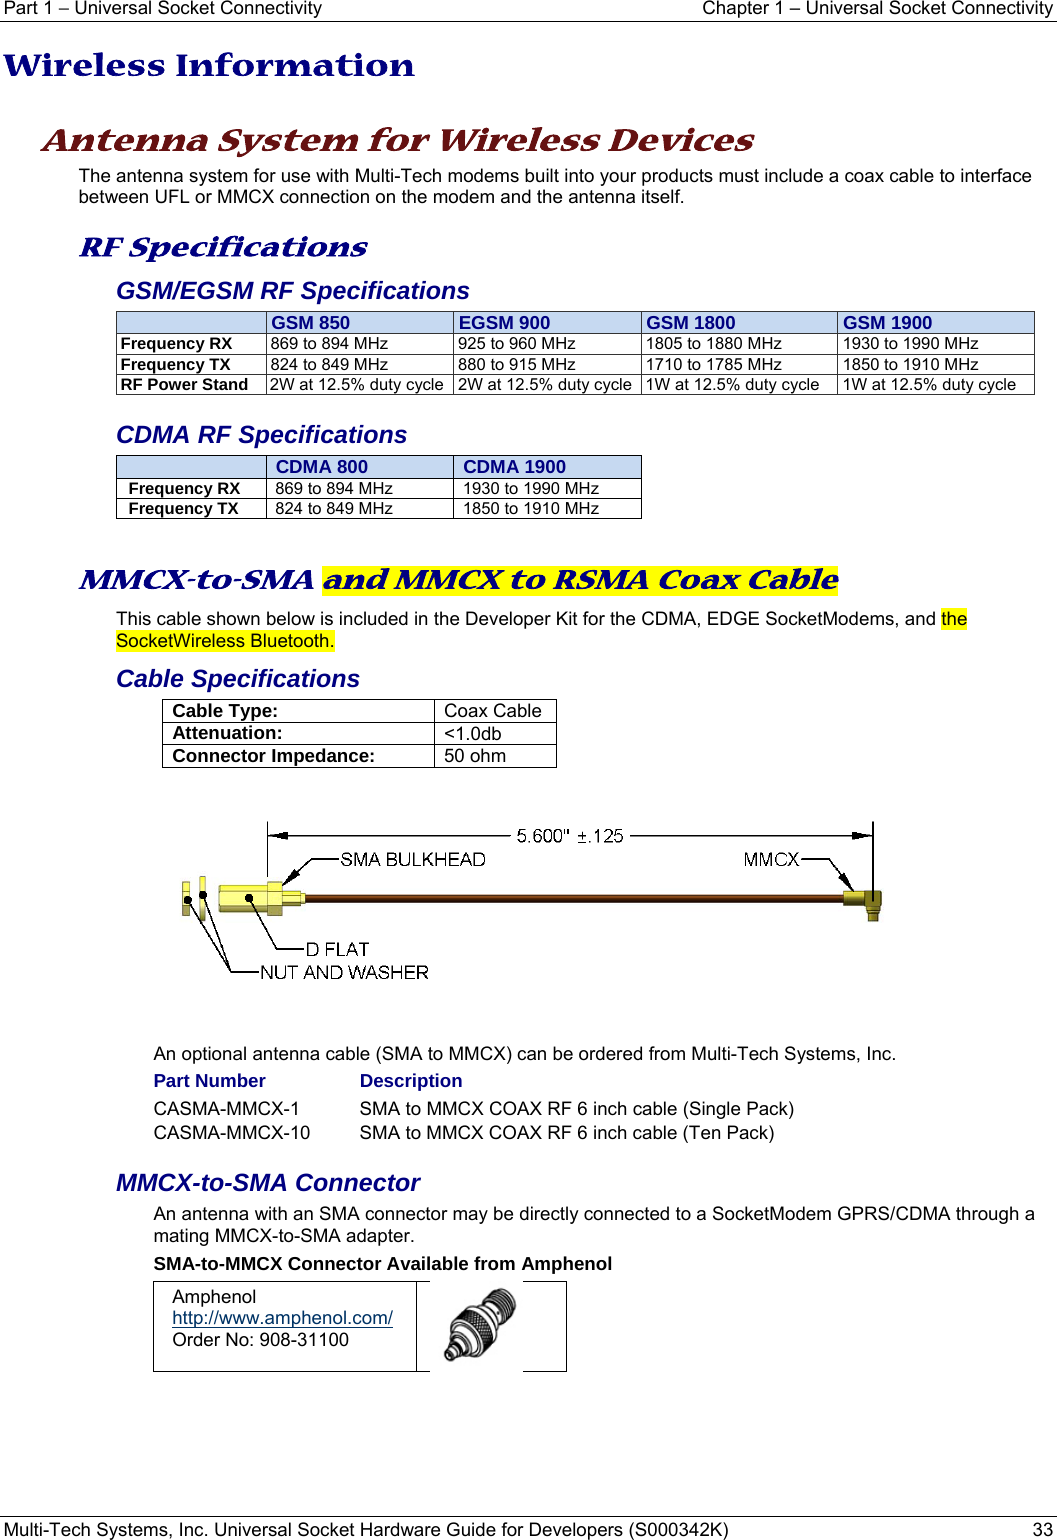 Part 1 − Universal Socket Connectivity    Chapter 1 – Universal Socket Connectivity Multi-Tech Systems, Inc. Universal Socket Hardware Guide for Developers (S000342K)  33  Wireless Information     Antenna System for Wireless Devices The antenna system for use with Multi-Tech modems built into your products must include a coax cable to interface between UFL or MMCX connection on the modem and the antenna itself.  RF Specifications GSM/EGSM RF Specifications  GSM 850  EGSM 900 GSM 1800 GSM 1900Frequency RX  869 to 894 MHz  925 to 960 MHz  1805 to 1880 MHz  1930 to 1990 MHz Frequency TX  824 to 849 MHz  880 to 915 MHz  1710 to 1785 MHz  1850 to 1910 MHz RF Power Stand  2W at 12.5% duty cycle 2W at 12.5% duty cycle 1W at 12.5% duty cycle  1W at 12.5% duty cycle CDMA RF Specifications  CDMA 800  CDMA 1900Frequency RX  869 to 894 MHz  1930 to 1990 MHz Frequency TX  824 to 849 MHz  1850 to 1910 MHz  MMCX-to-SMA and MMCX to RSMA Coax Cable This cable shown below is included in the Developer Kit for the CDMA, EDGE SocketModems, and the SocketWireless Bluetooth.  Cable Specifications Cable Type:  Coax Cable Attenuation:  &lt;1.0db Connector Impedance:  50 ohm      An optional antenna cable (SMA to MMCX) can be ordered from Multi-Tech Systems, Inc.  Part Number    Description CASMA-MMCX-1     SMA to MMCX COAX RF 6 inch cable (Single Pack) CASMA-MMCX-10    SMA to MMCX COAX RF 6 inch cable (Ten Pack) MMCX-to-SMA Connector An antenna with an SMA connector may be directly connected to a SocketModem GPRS/CDMA through a mating MMCX-to-SMA adapter. SMA-to-MMCX Connector Available from Amphenol Amphenol  http://www.amphenol.com/ Order No: 908-31100    